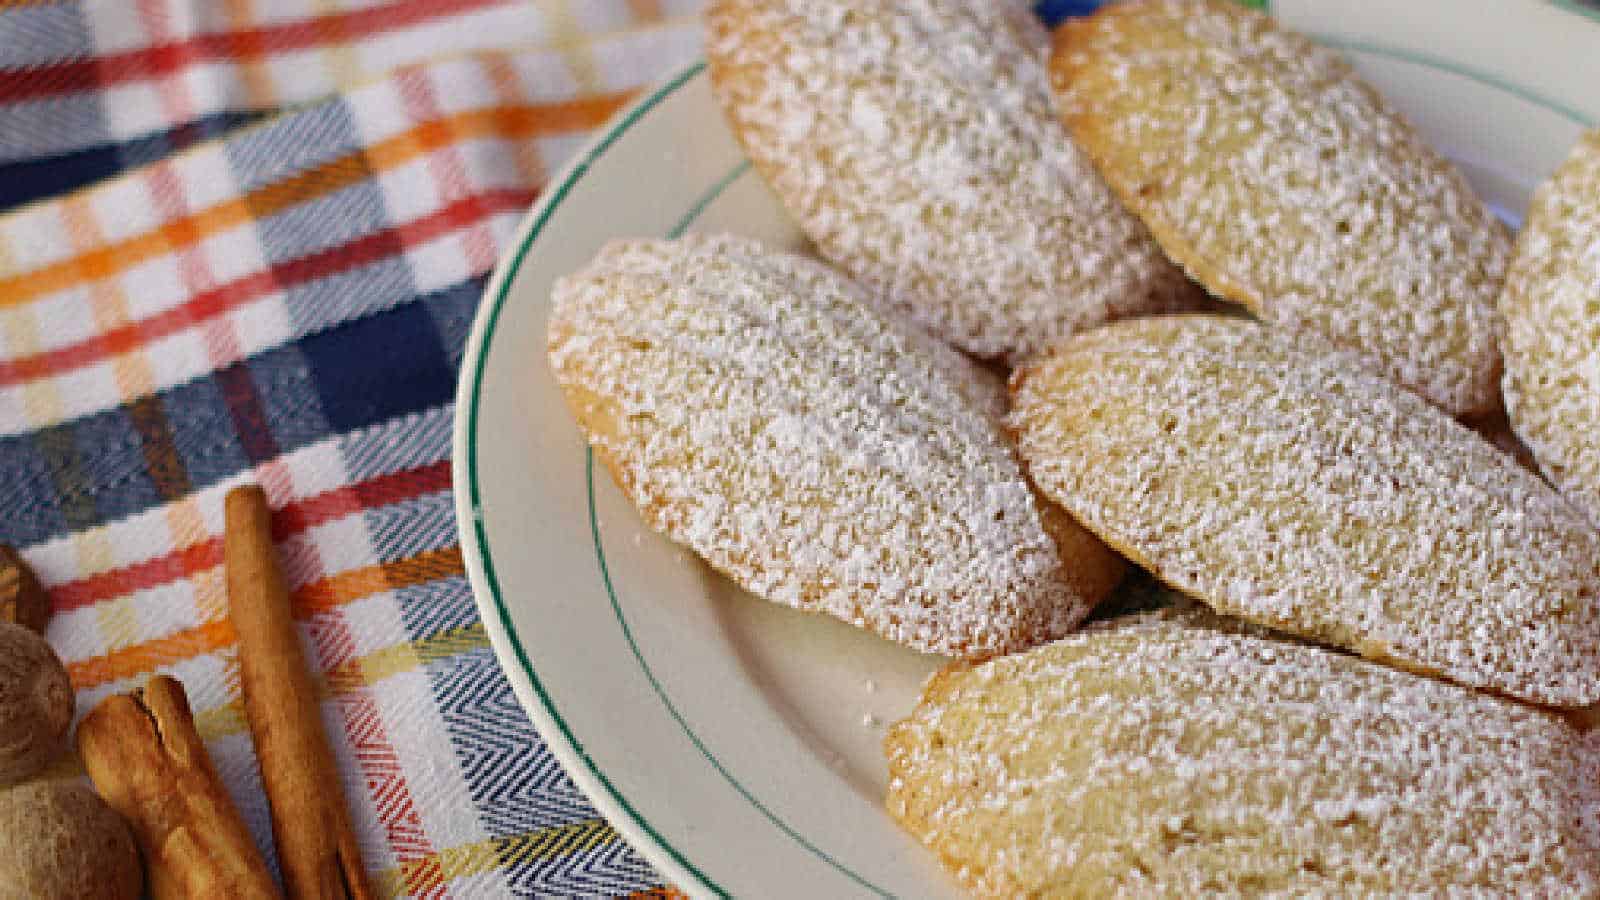 A plate with madeleine cakes sprinkles with powdered sugar.